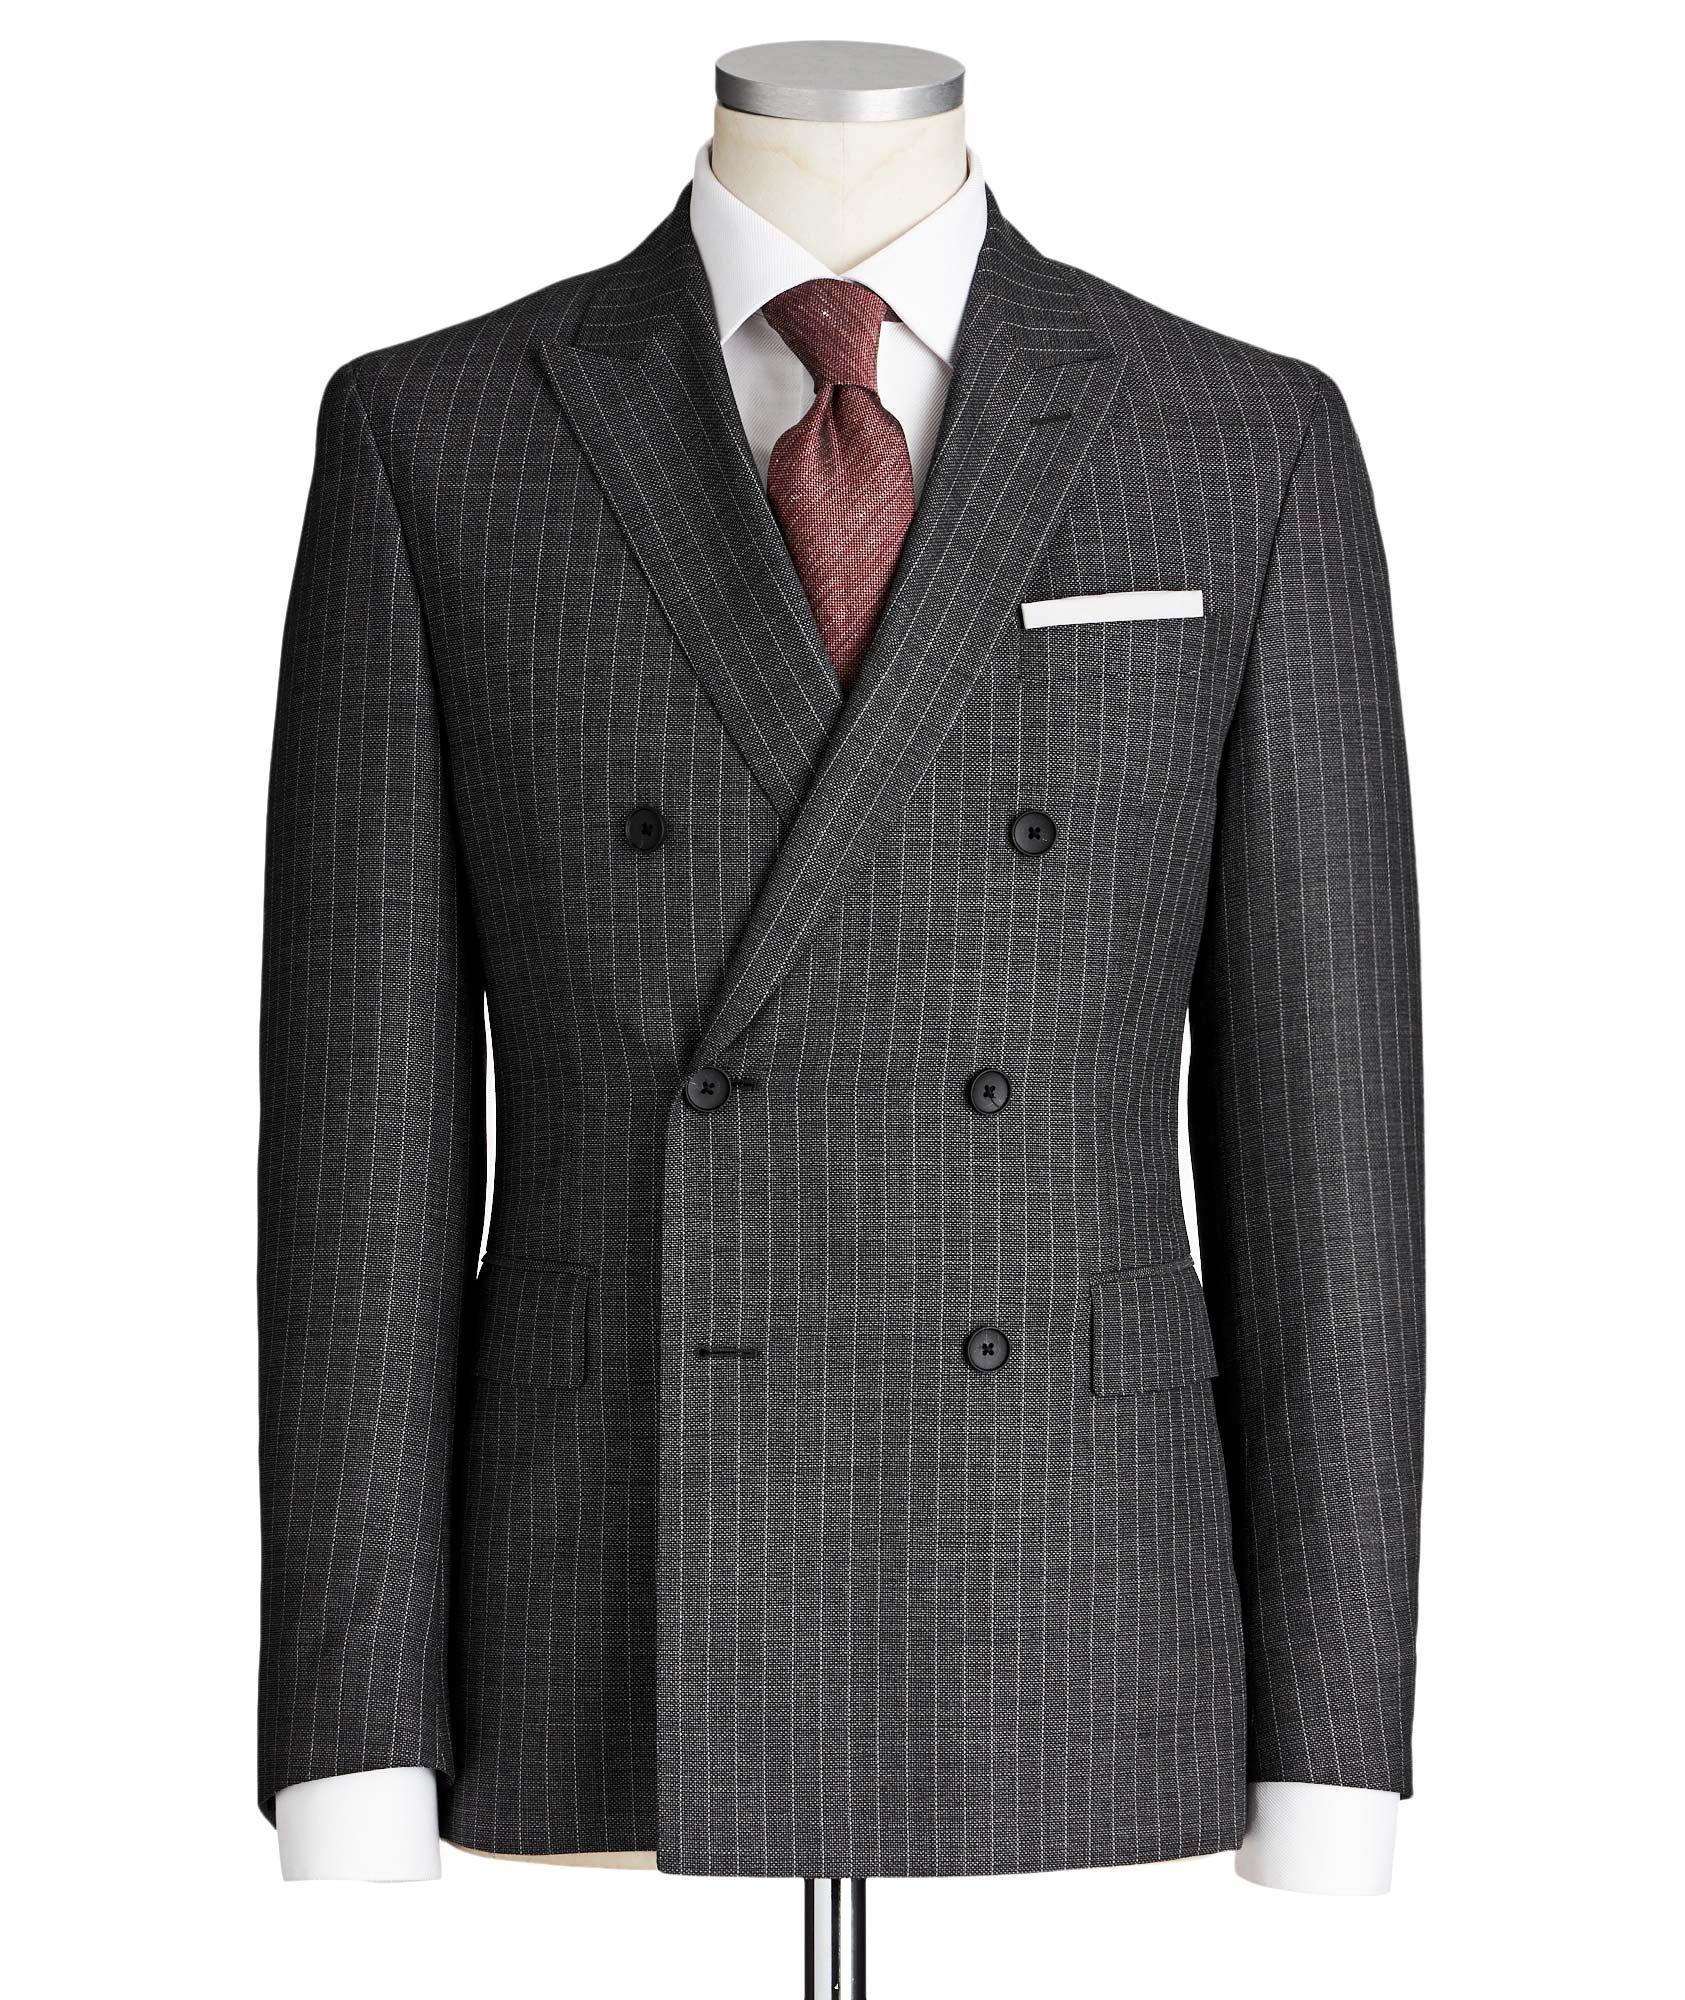 Namil3/Ben2 Double-Breasted Pinstriped Suit image 0